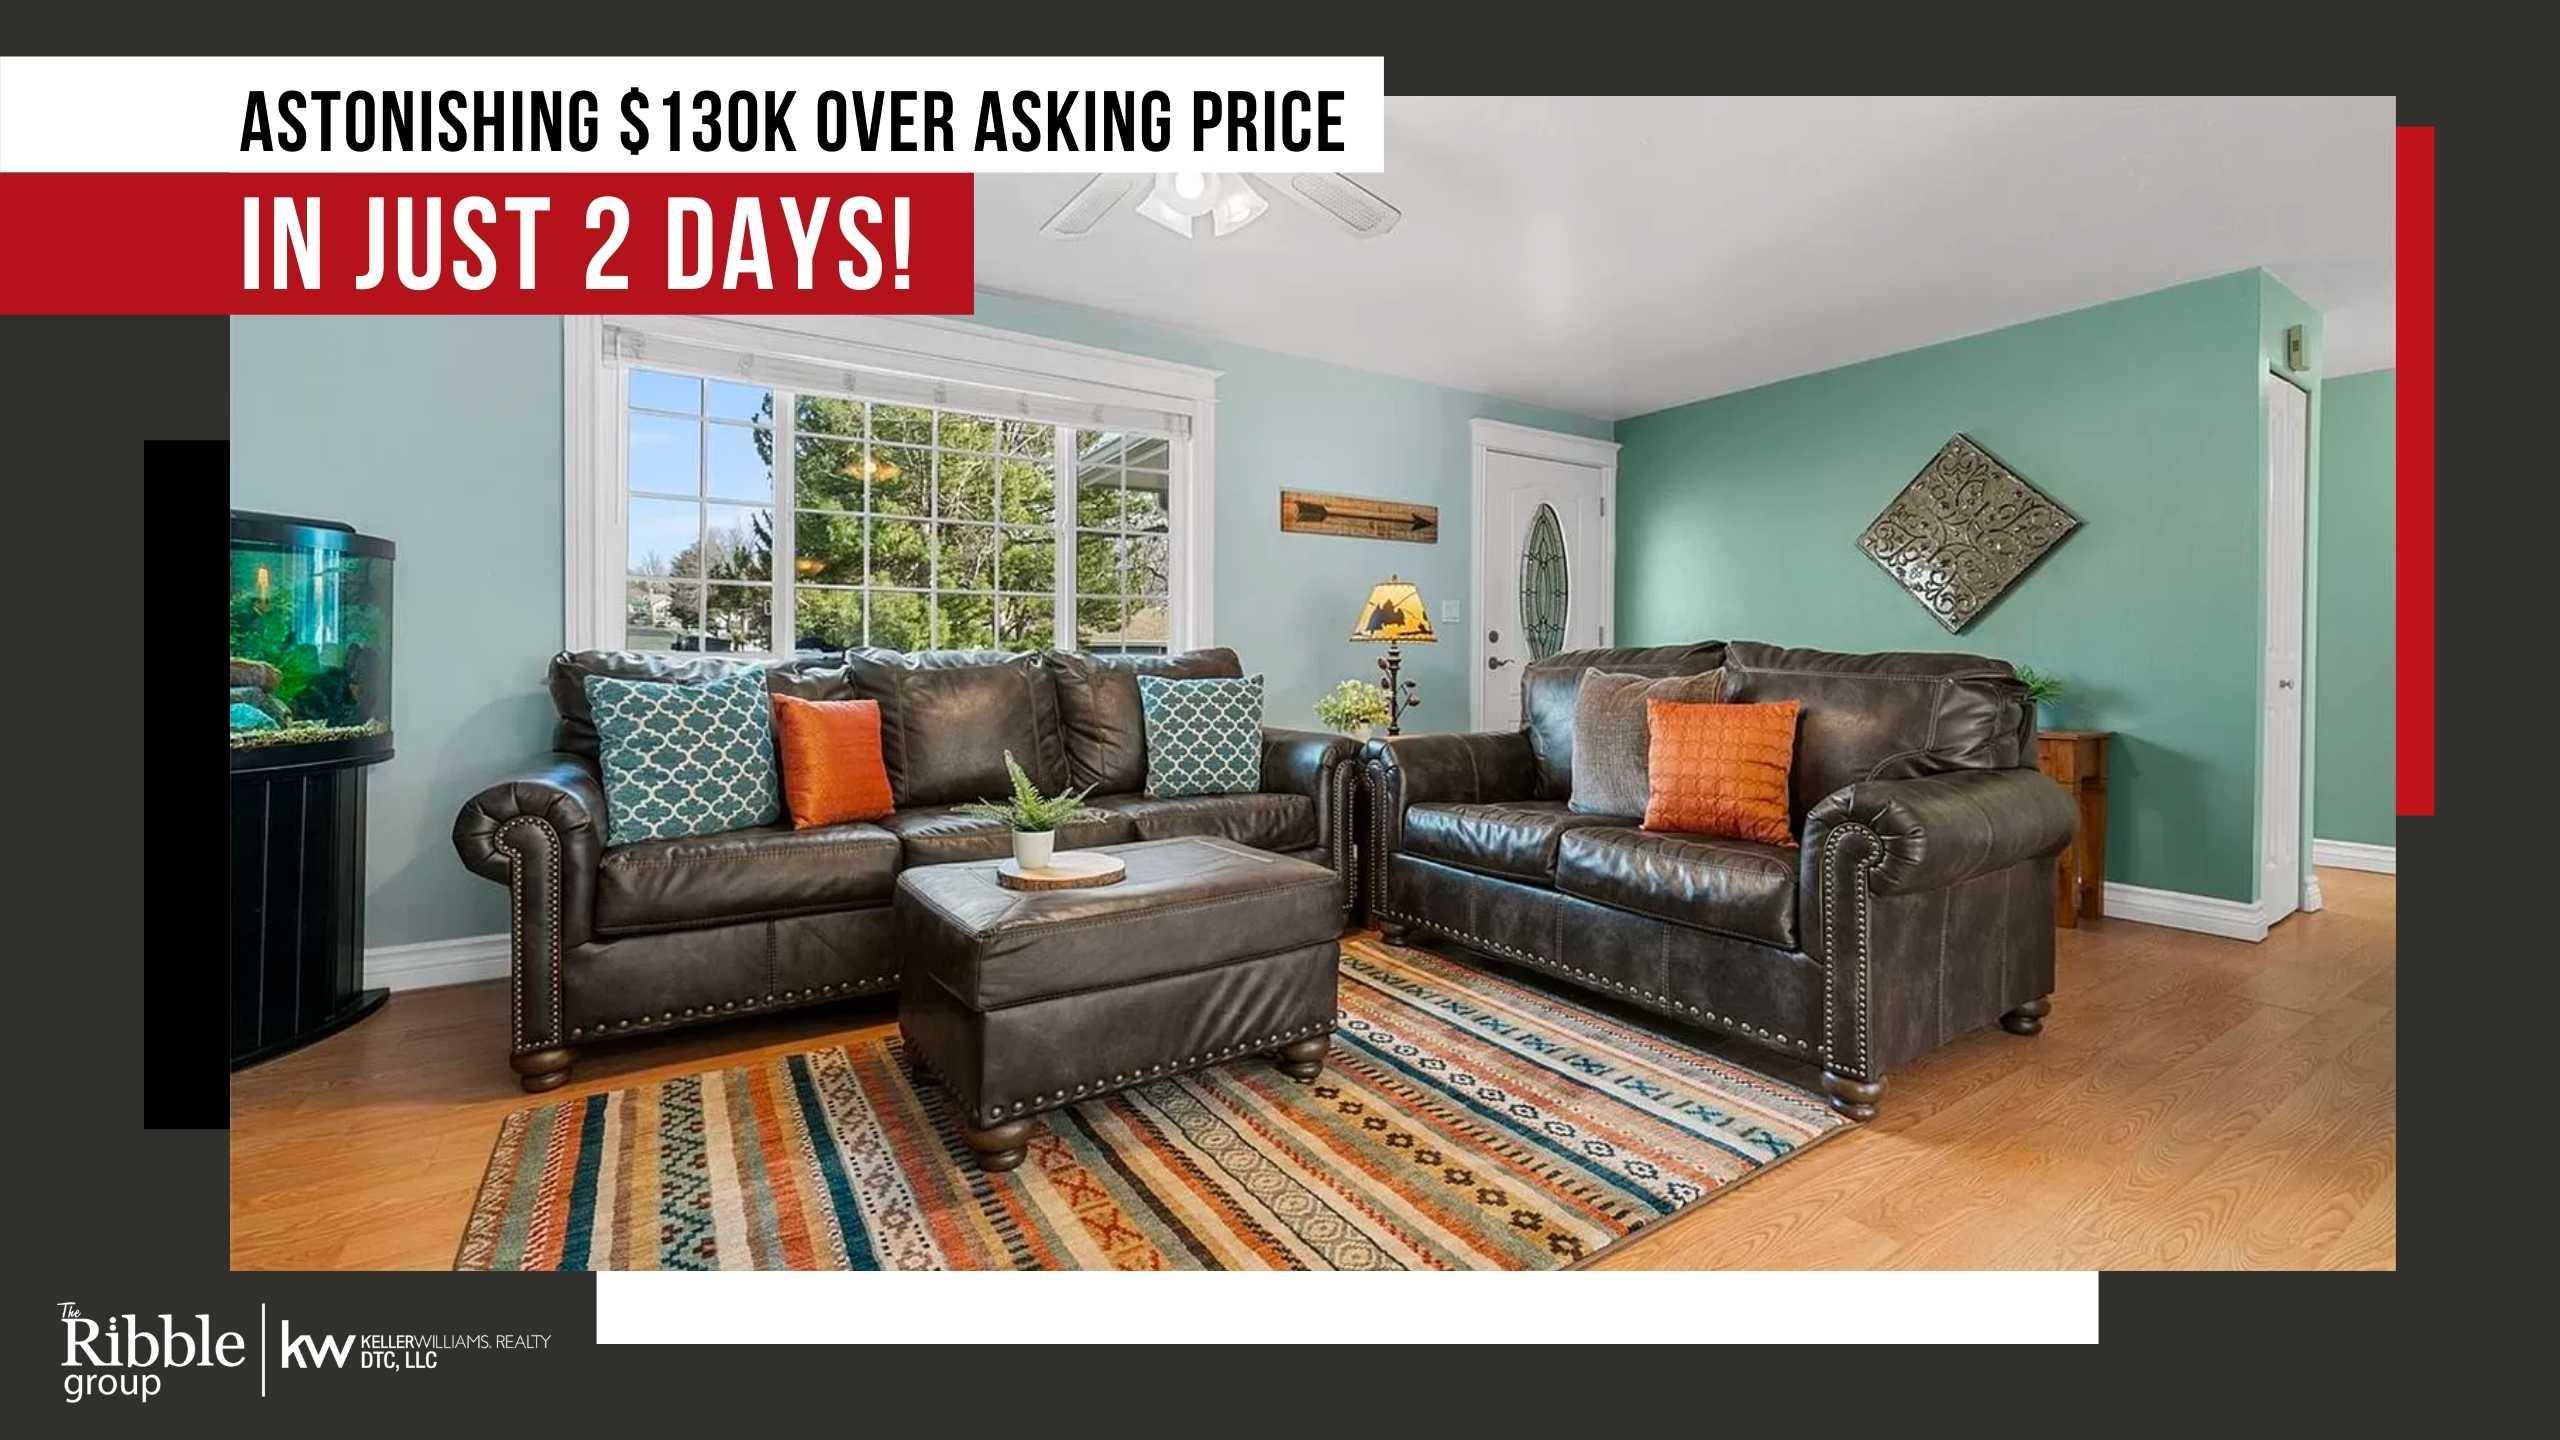 We Got Them An Astonishing $130K Over Asking Price in Just 2 Days!